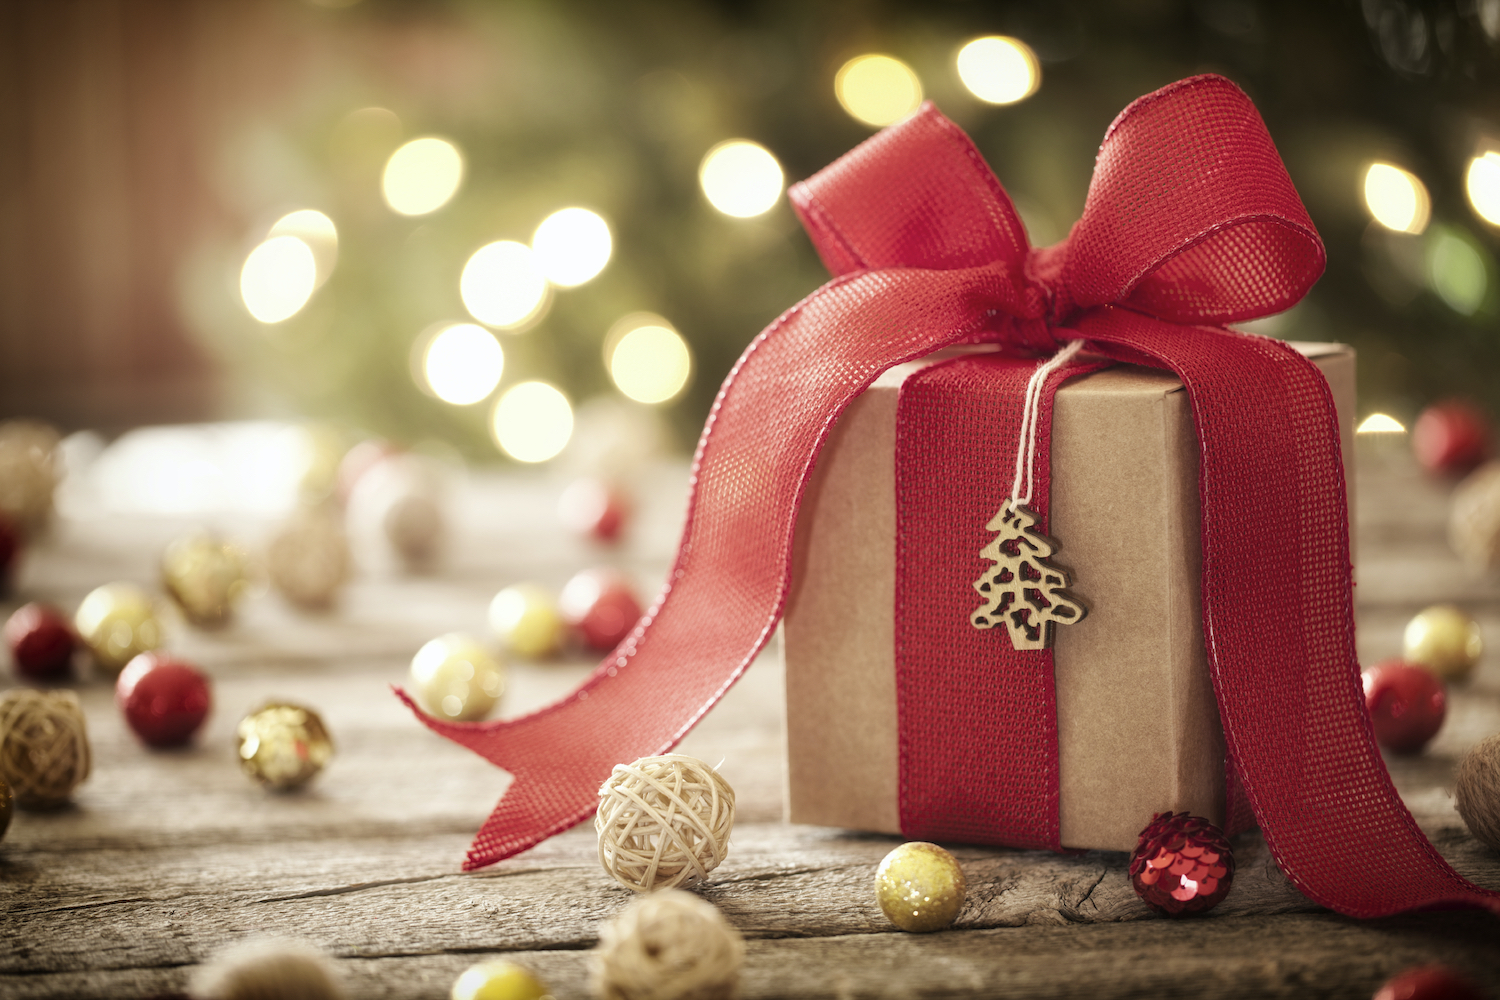 Closeup of a small holiday gift wrapped in brown paper and a red ribbon surrounded by festive balls by a Christmas tree